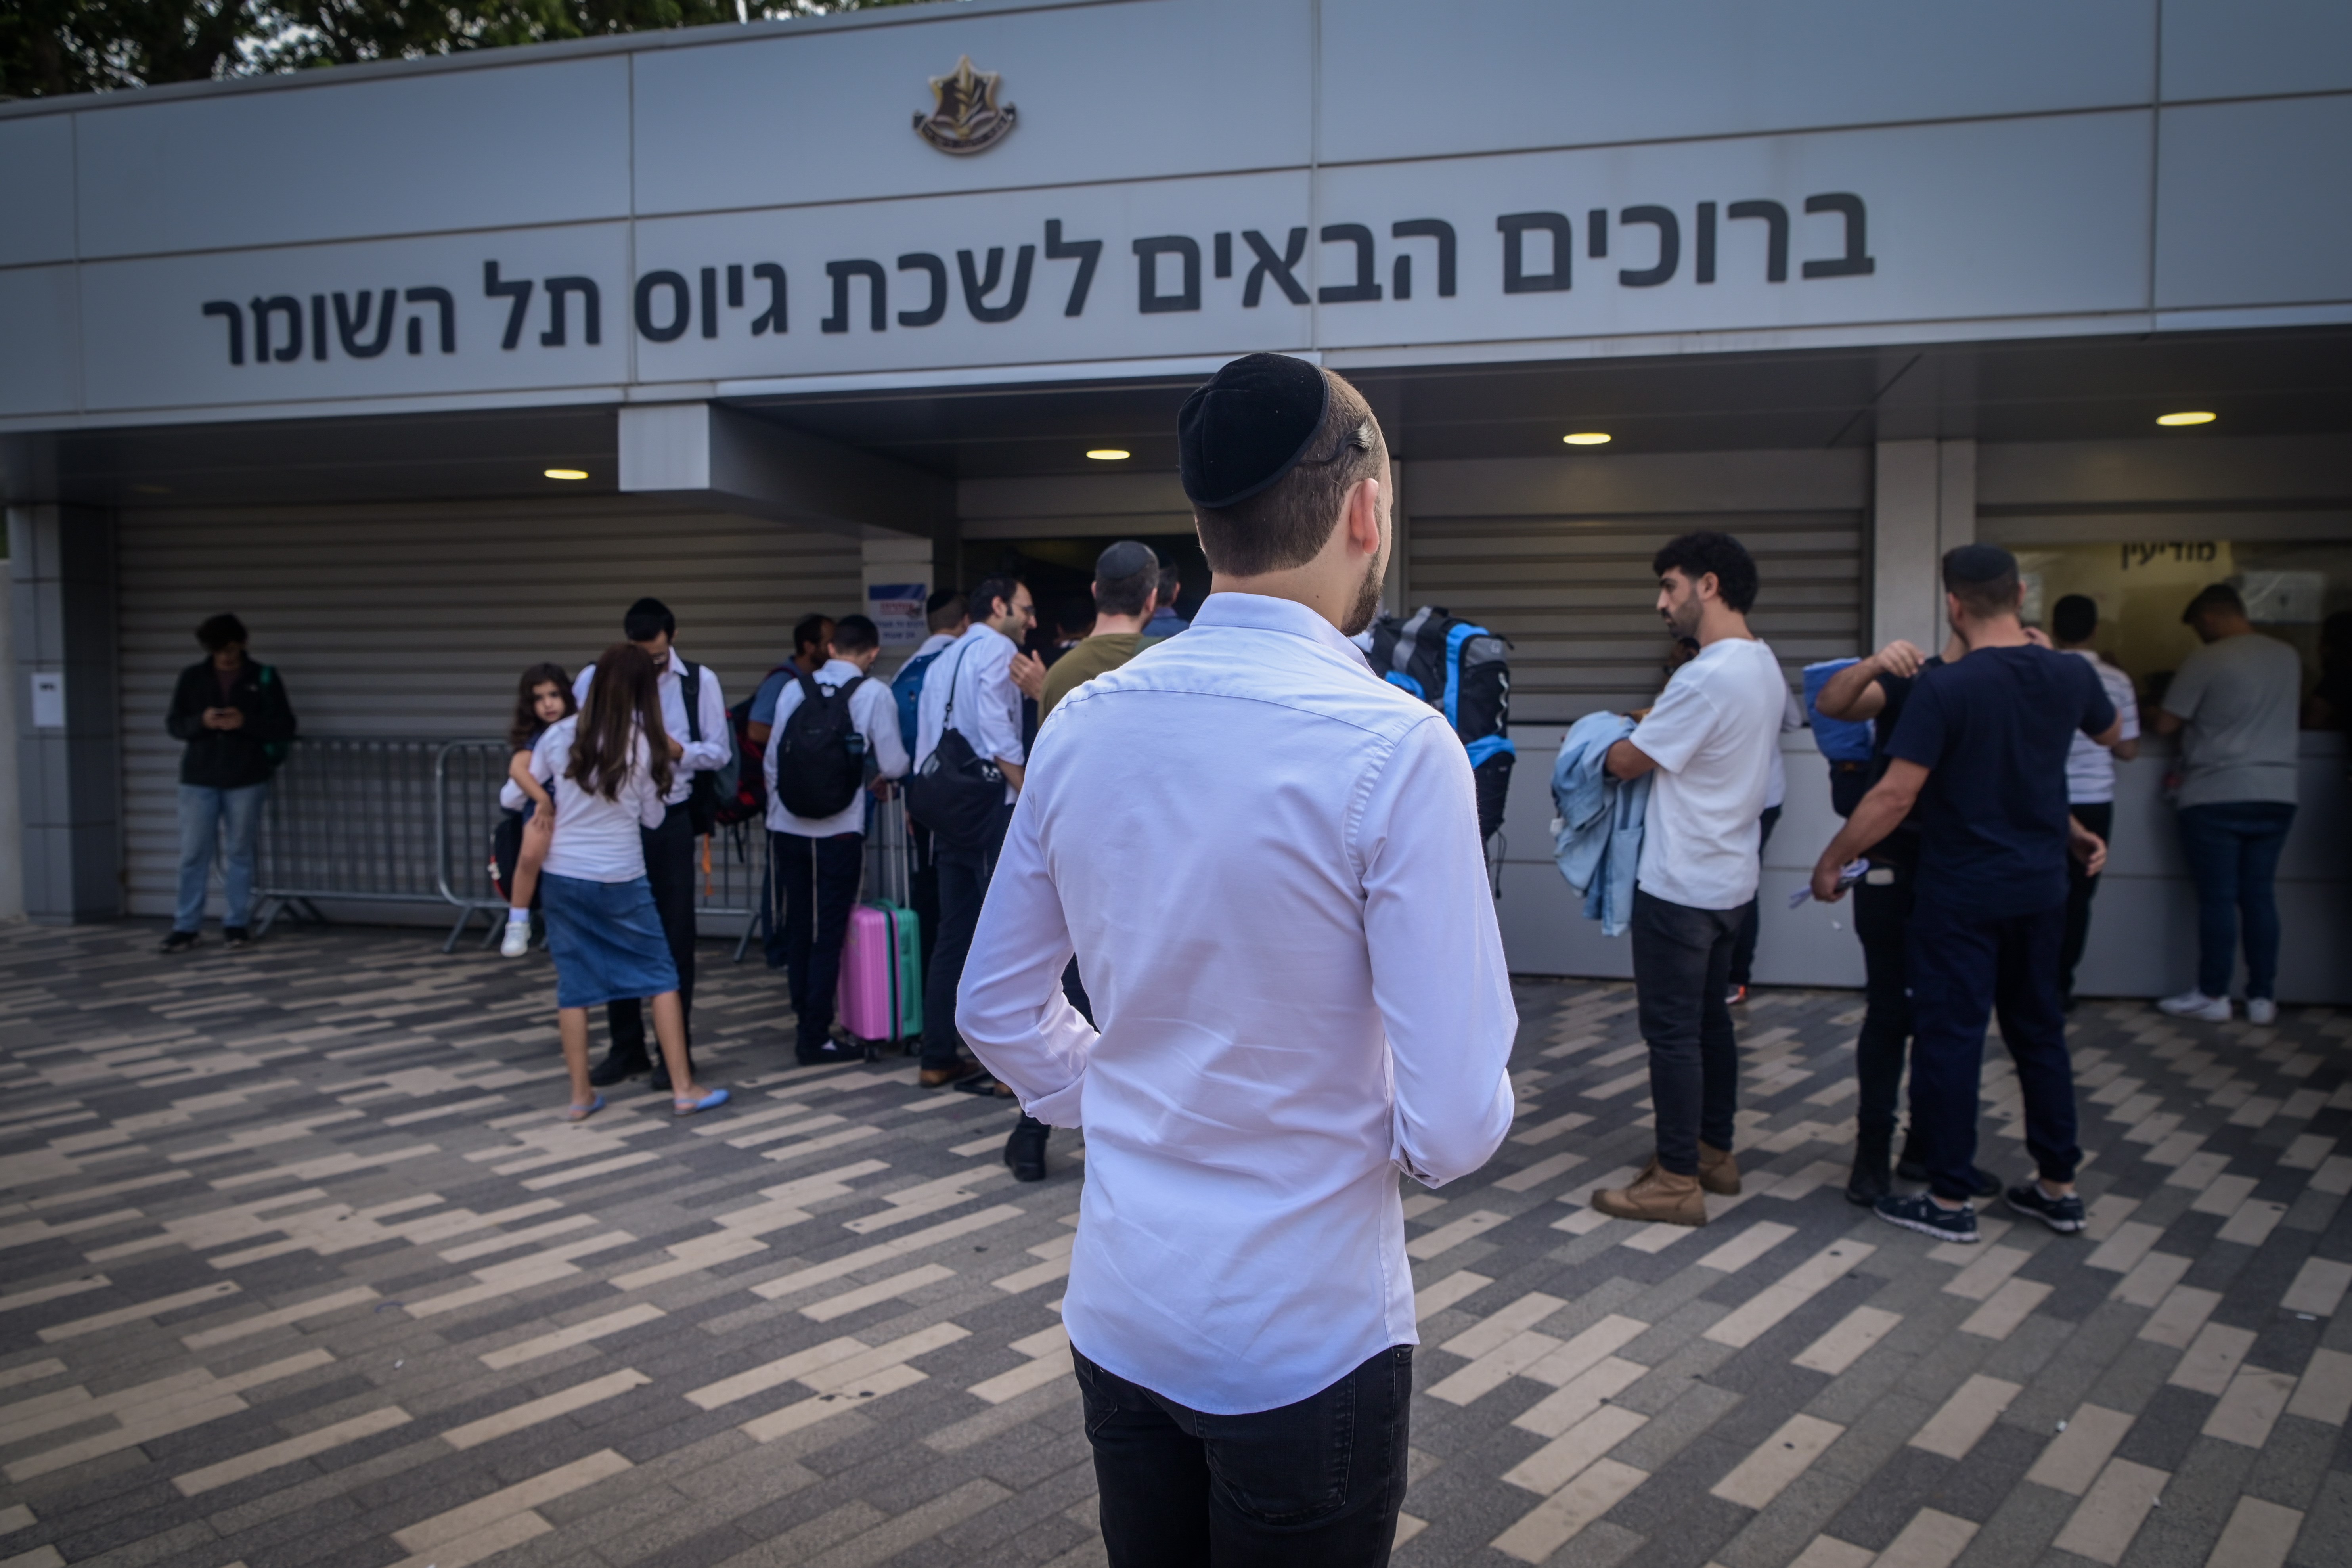 Haredi Enlistment In the IDF – A New Normal?